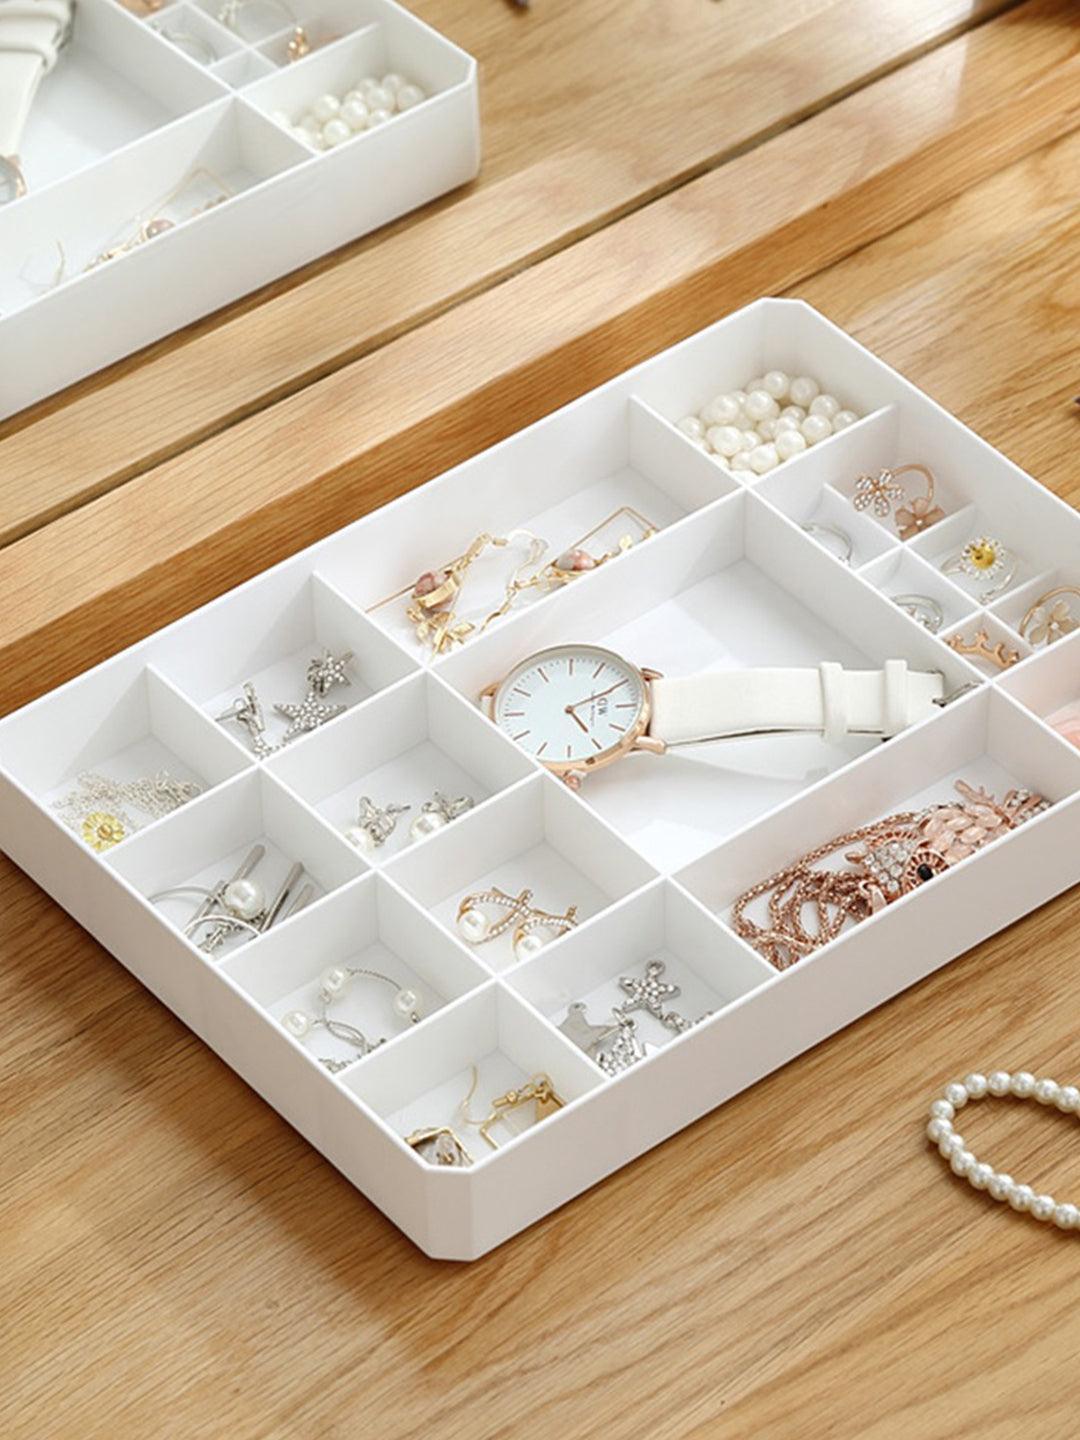 https://cdn.shopify.com/s/files/1/0267/1699/5754/files/market99-makeup-organizer-for-rings-earrings-necklaces-storage-and-organization-2-29022169465002.jpg?v=1697013412&width=1080